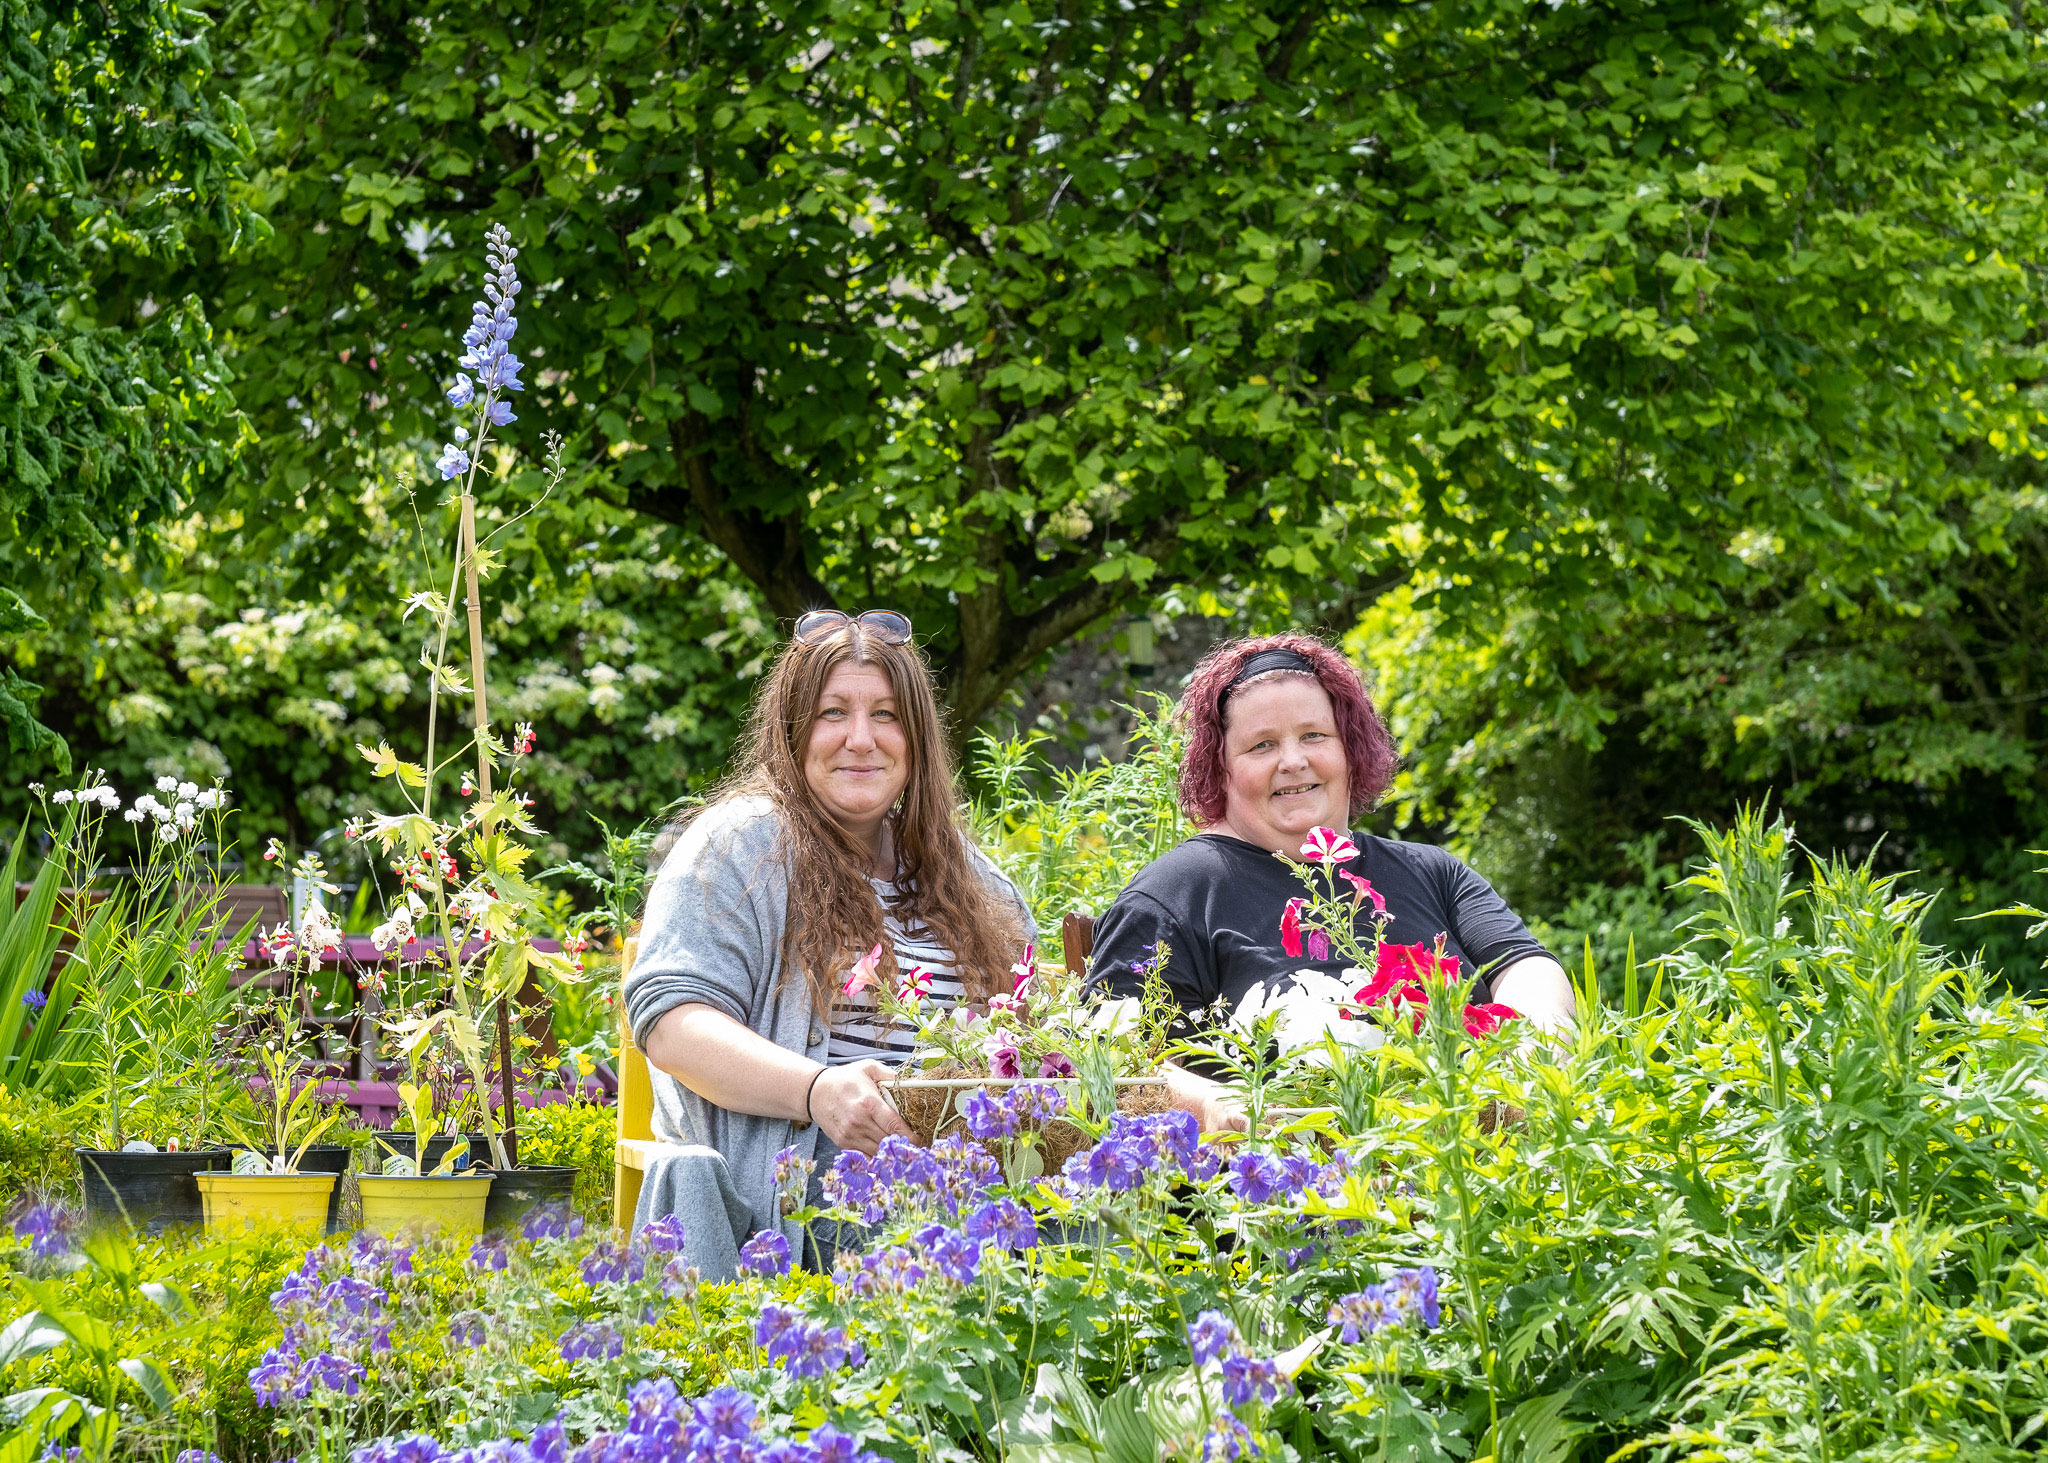 Press Image featuring PKAVS Mental Health and Wellbeing Hub at Walled Garden for the Perth and Kinross Mental Health and Wellbeing Festival